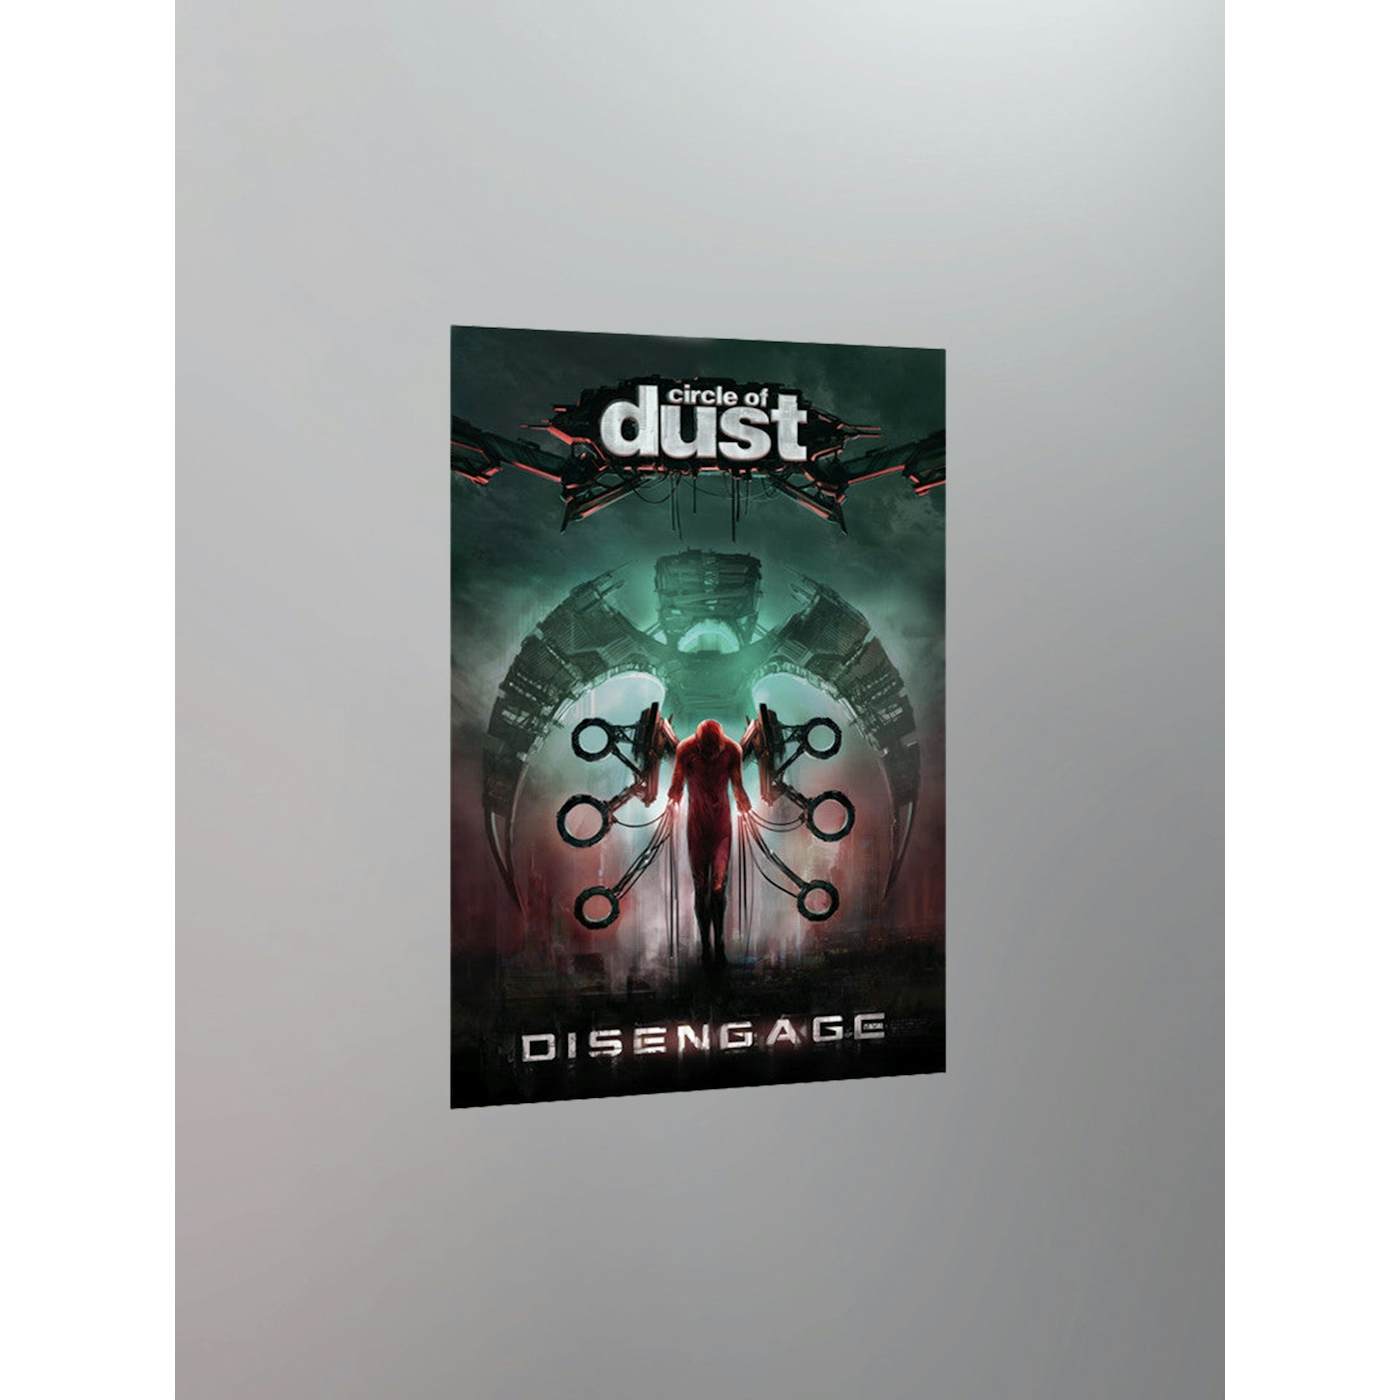 Circle of Dust - Disengage 11x17" Poster